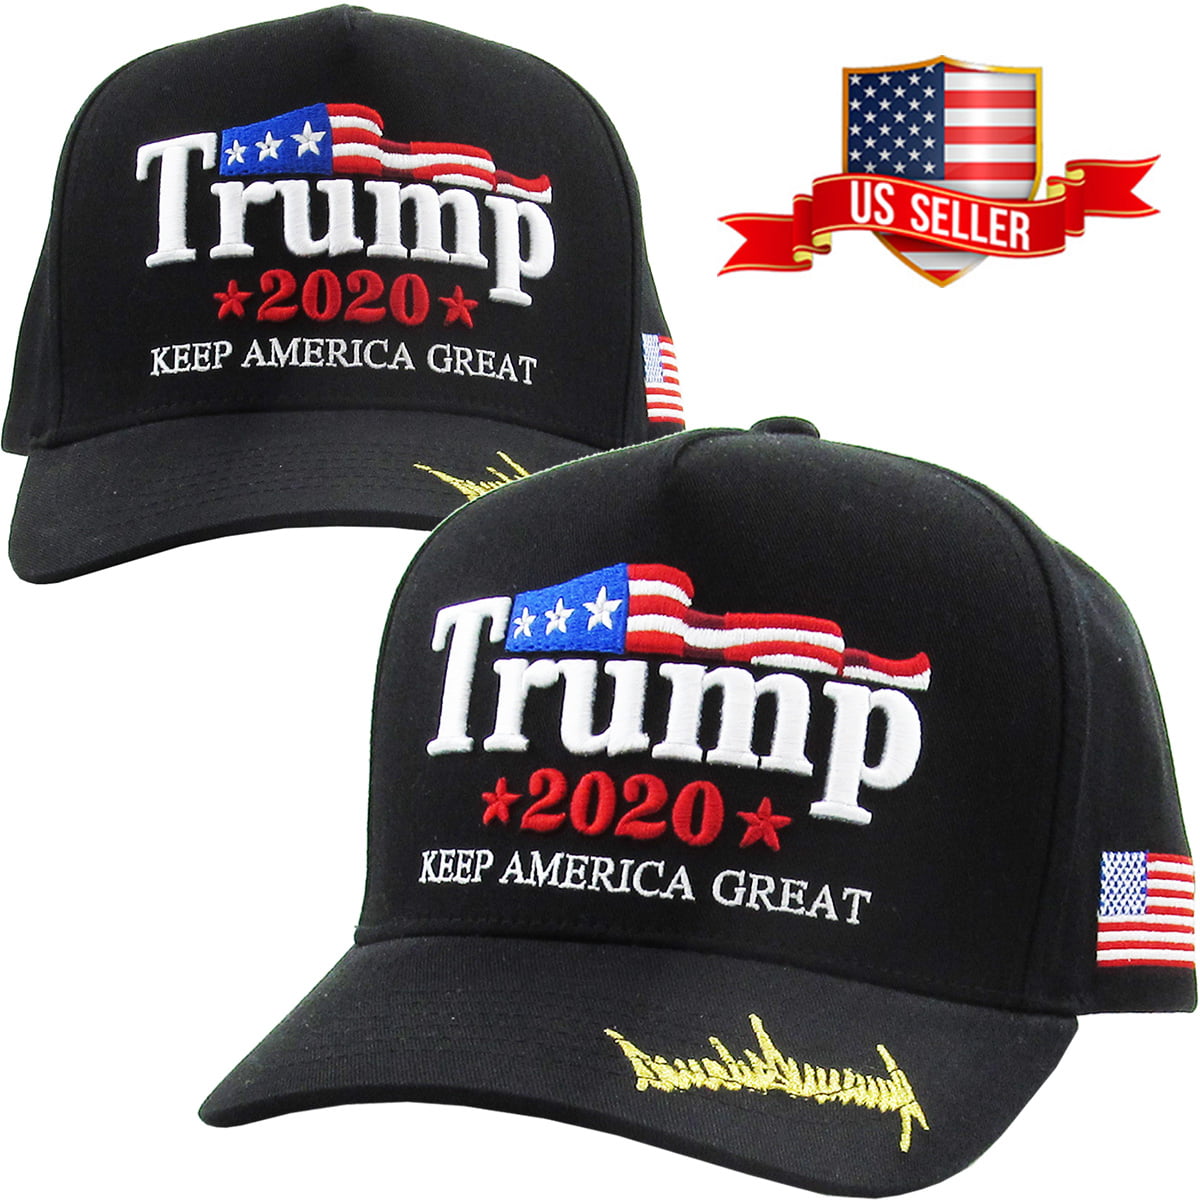 Donald Trump 2020 Hat Keep Make America Great Again Embroidered Hat Black KAG US 